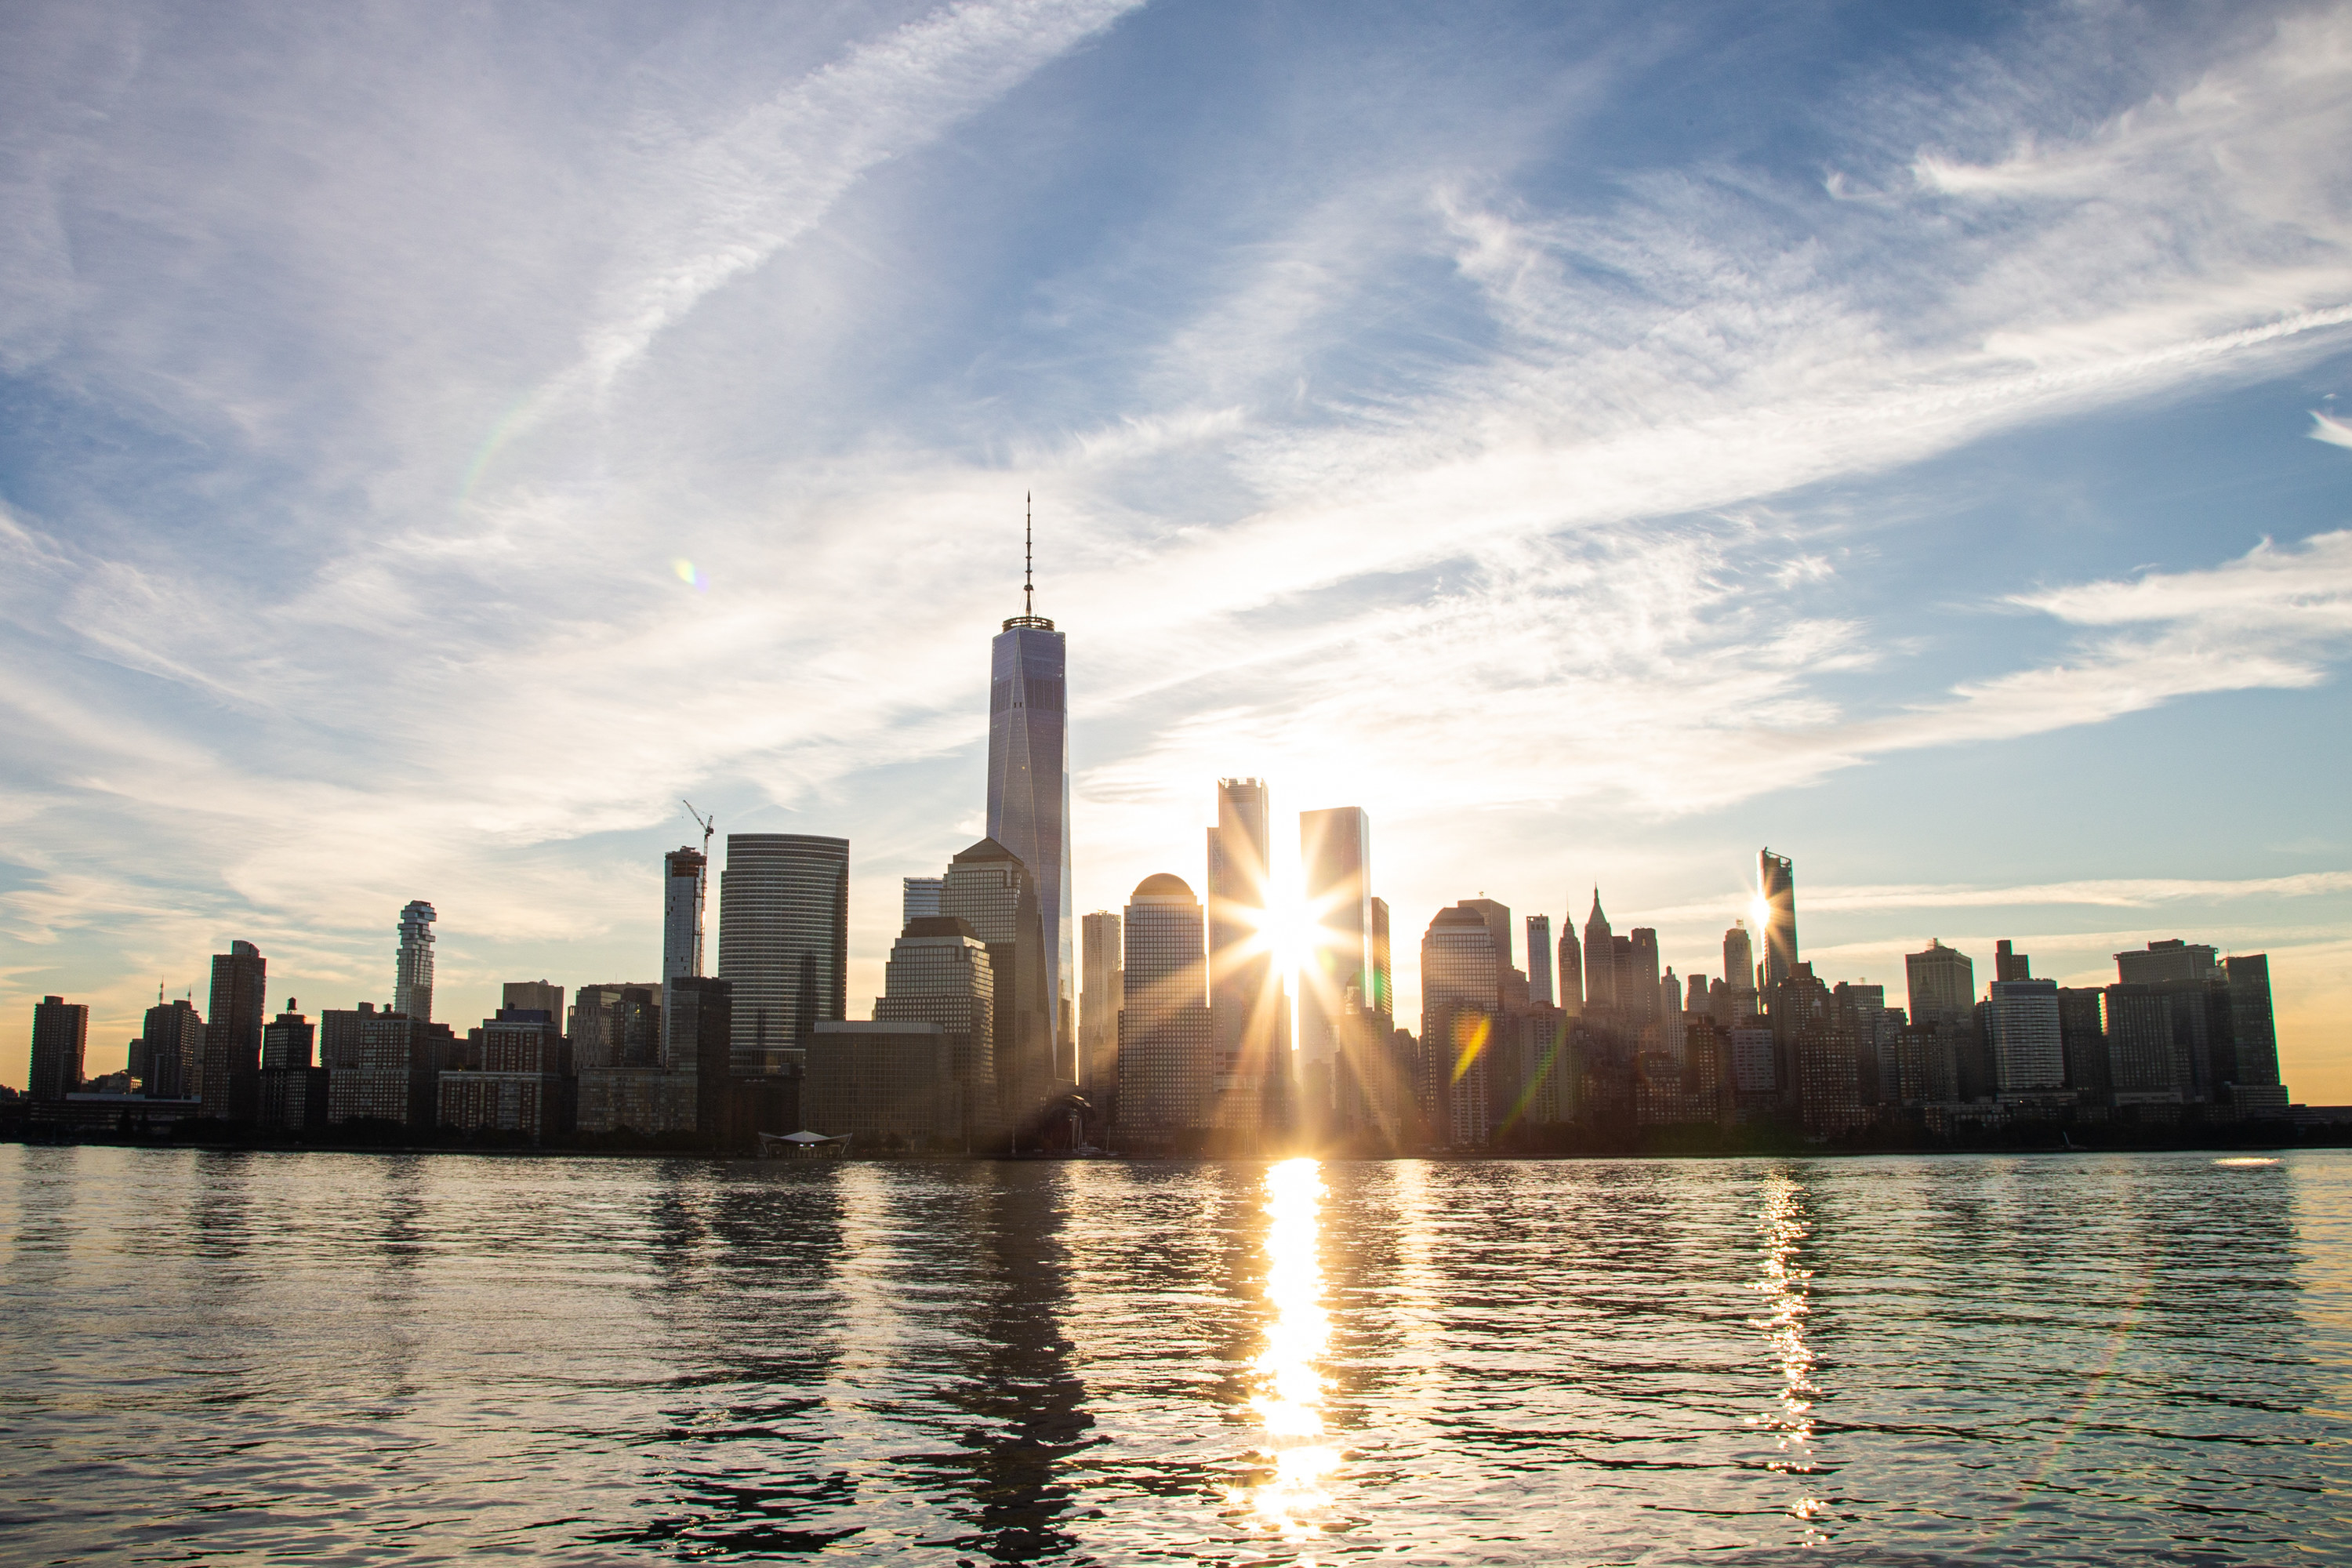 The sunset shining through the New York City skyline, photographed from the water